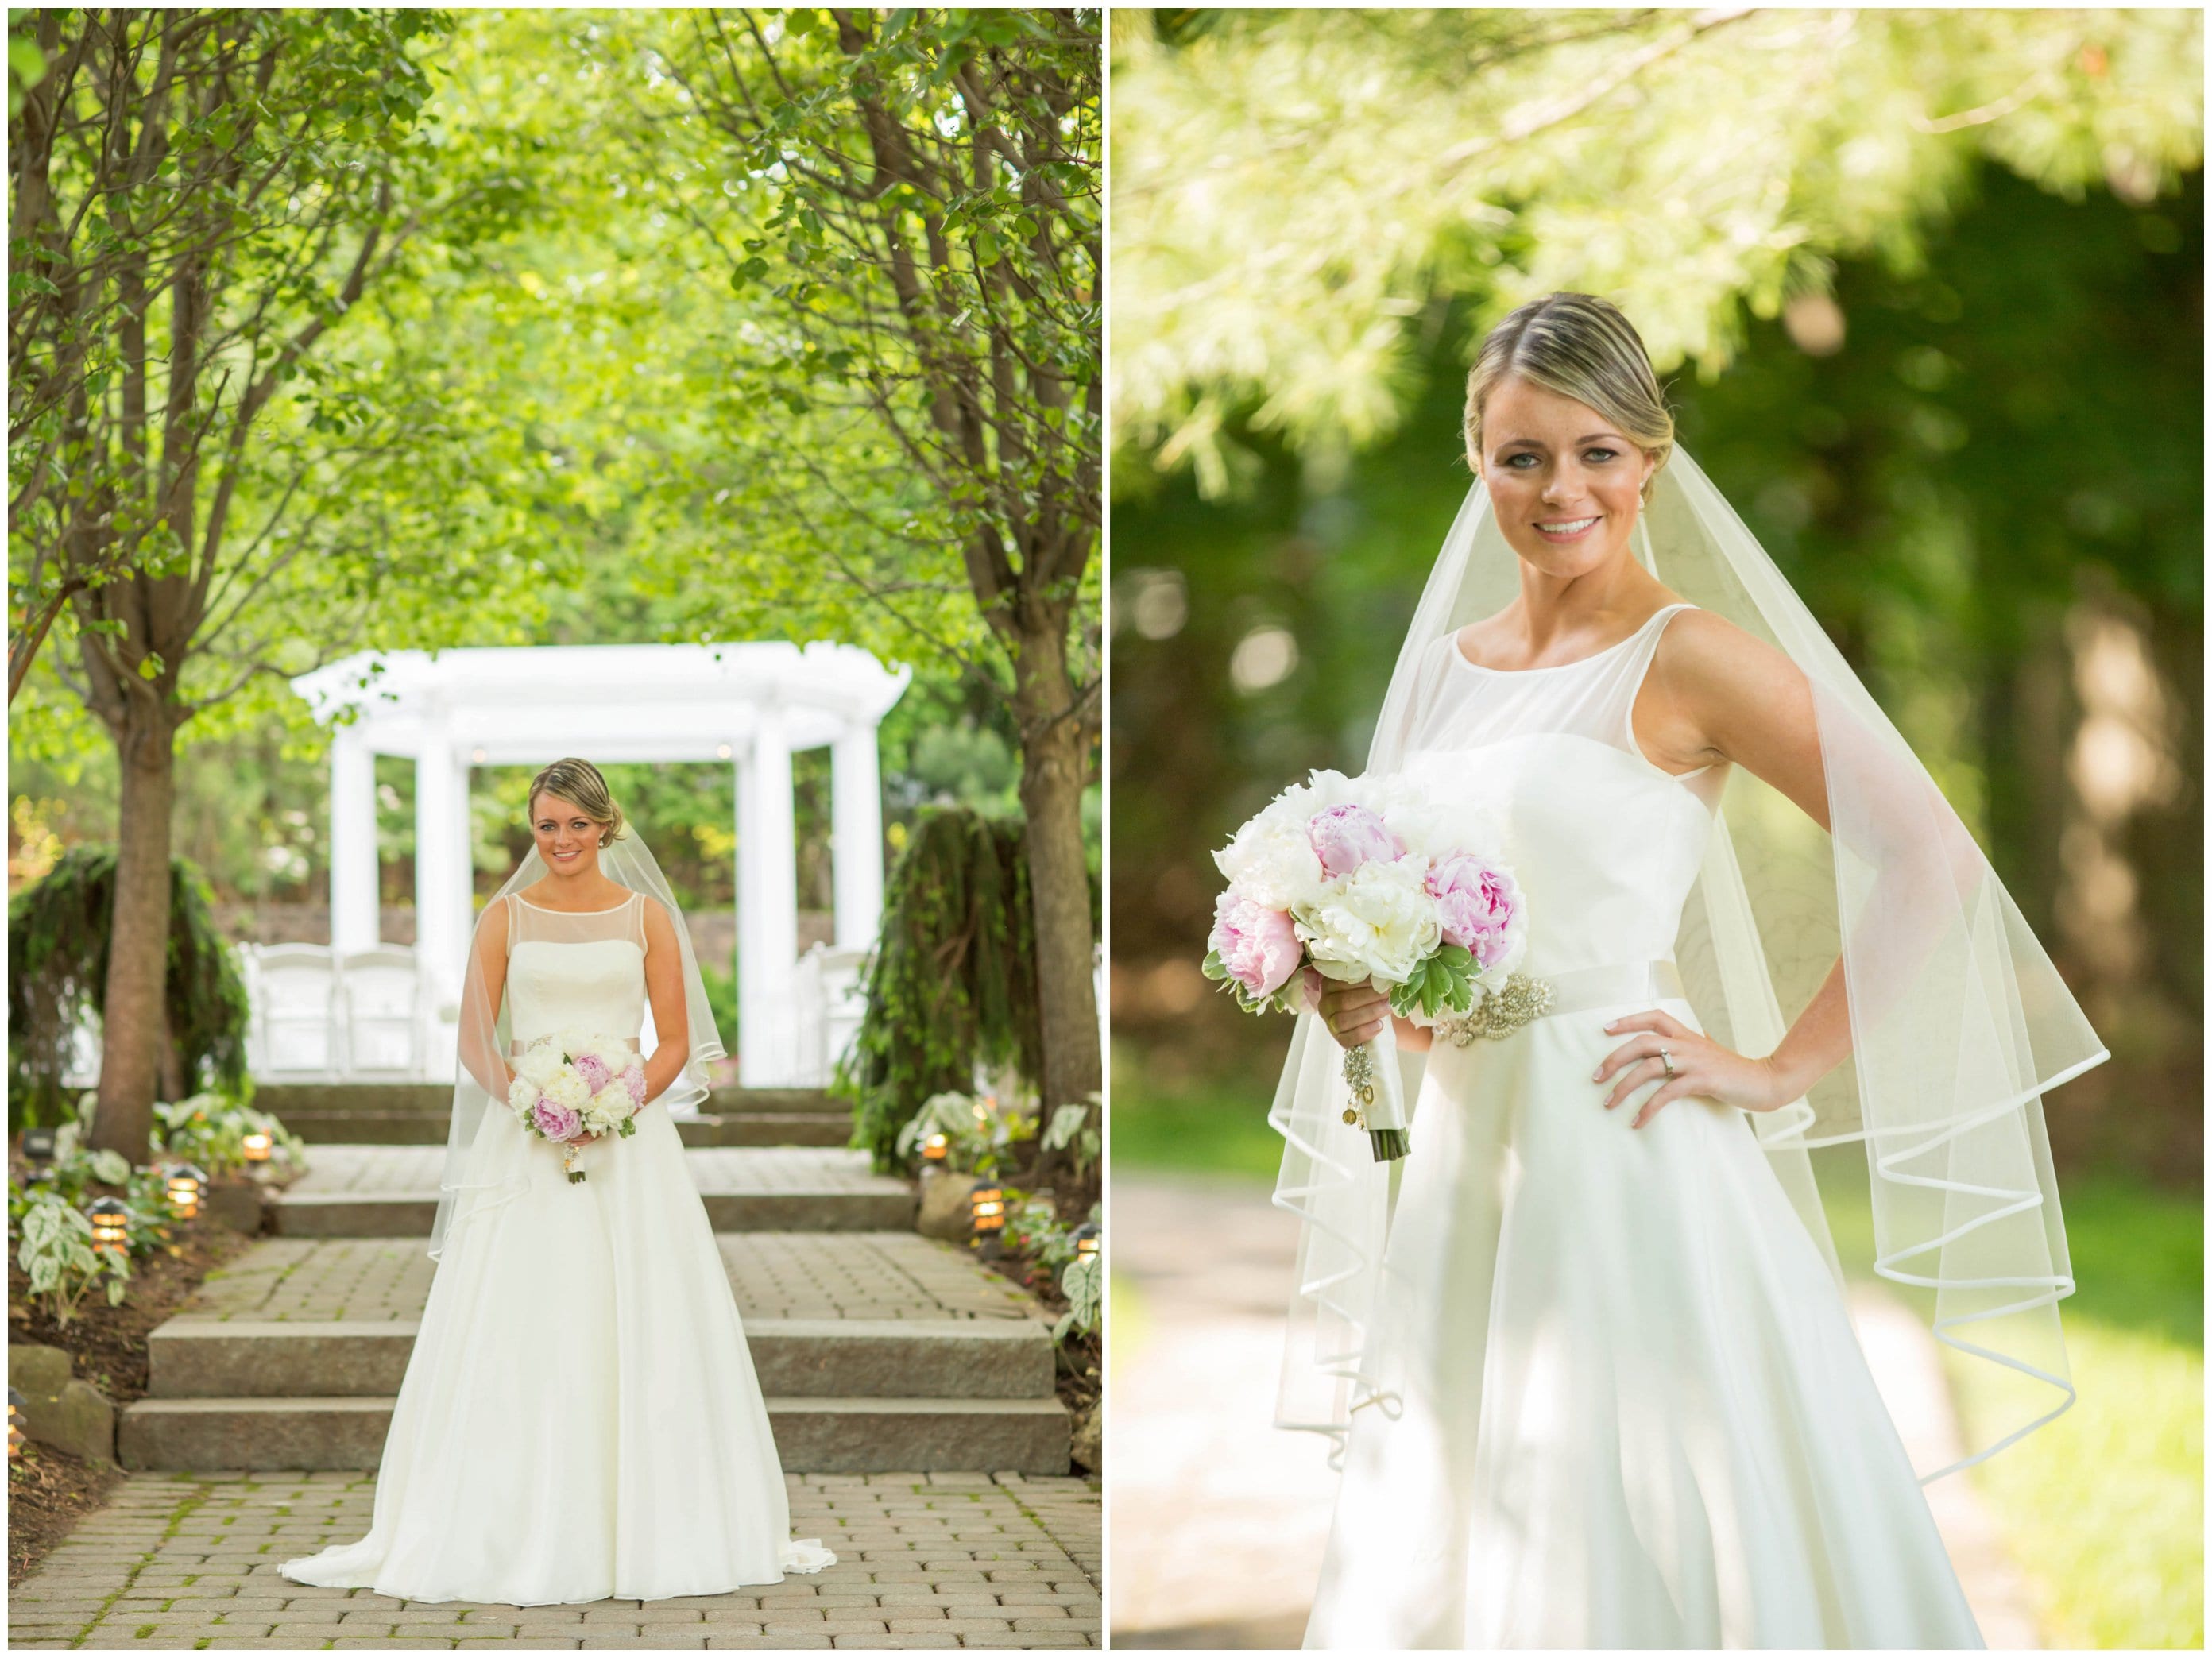 View More: http://kaitlinnoelphotography.pass.us/colleenandwestonmarried